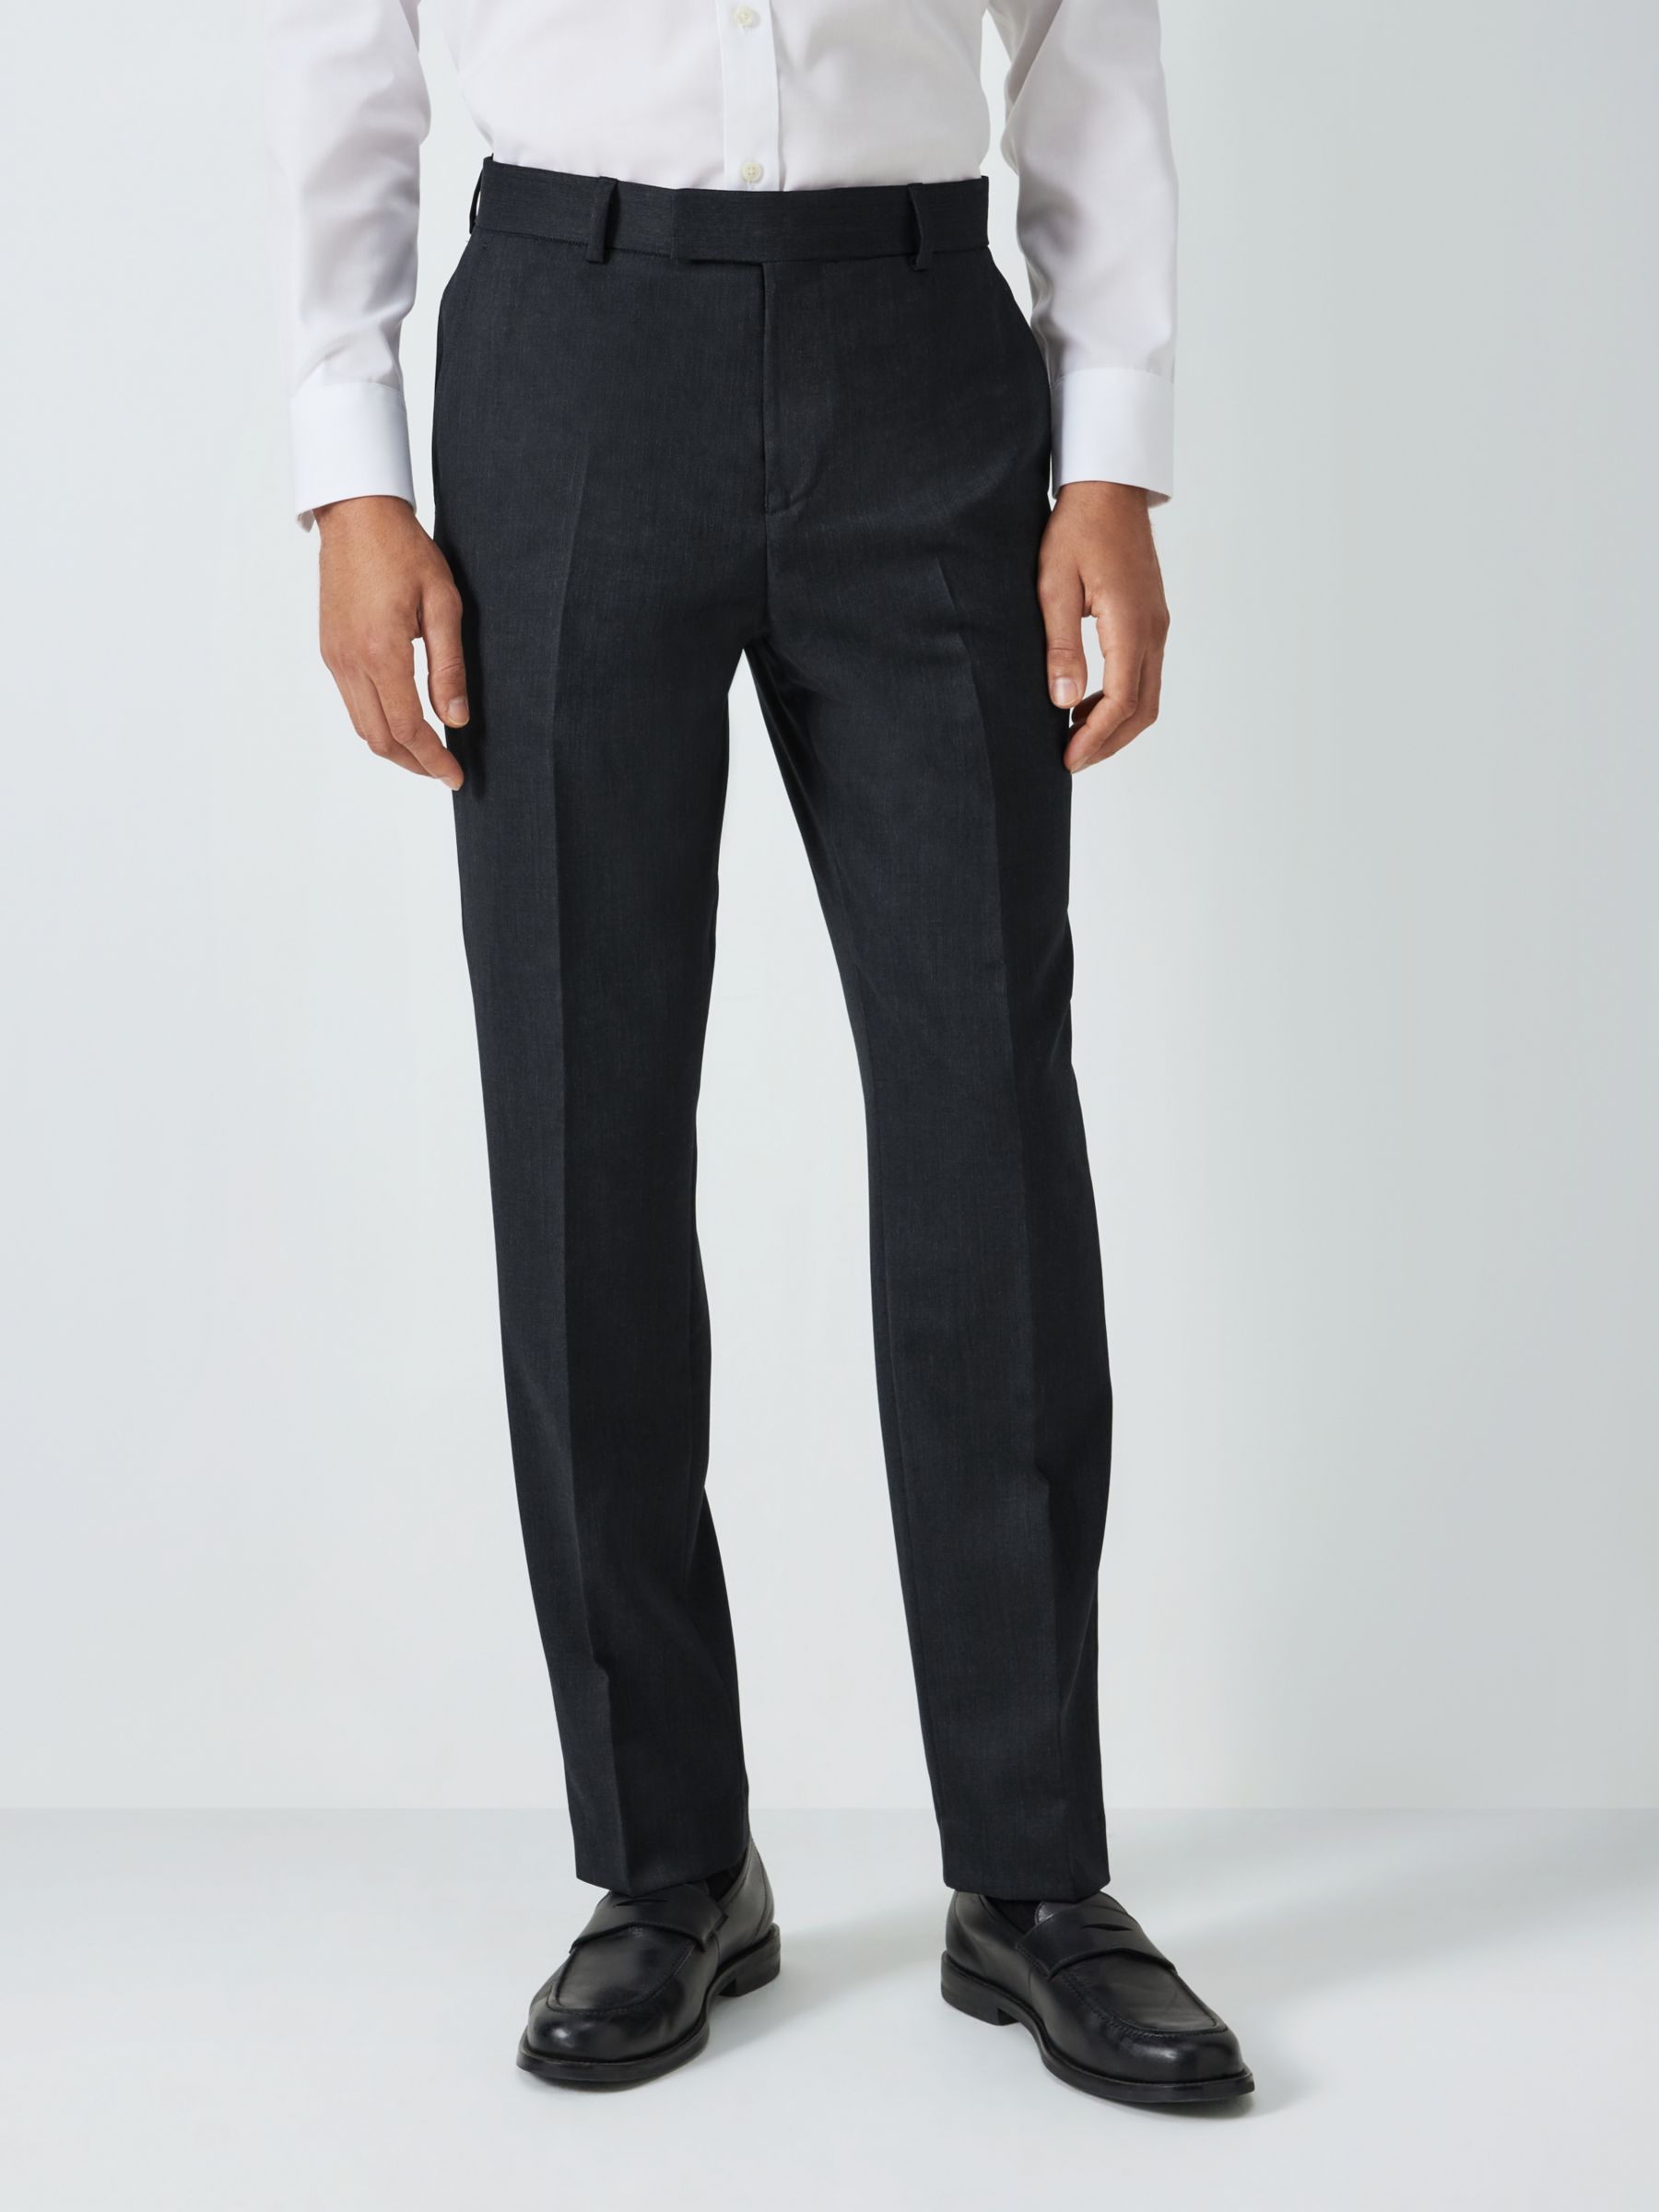 John Lewis Washable Wool Blend Regular Fit Suit Trousers, Charcoal at ...